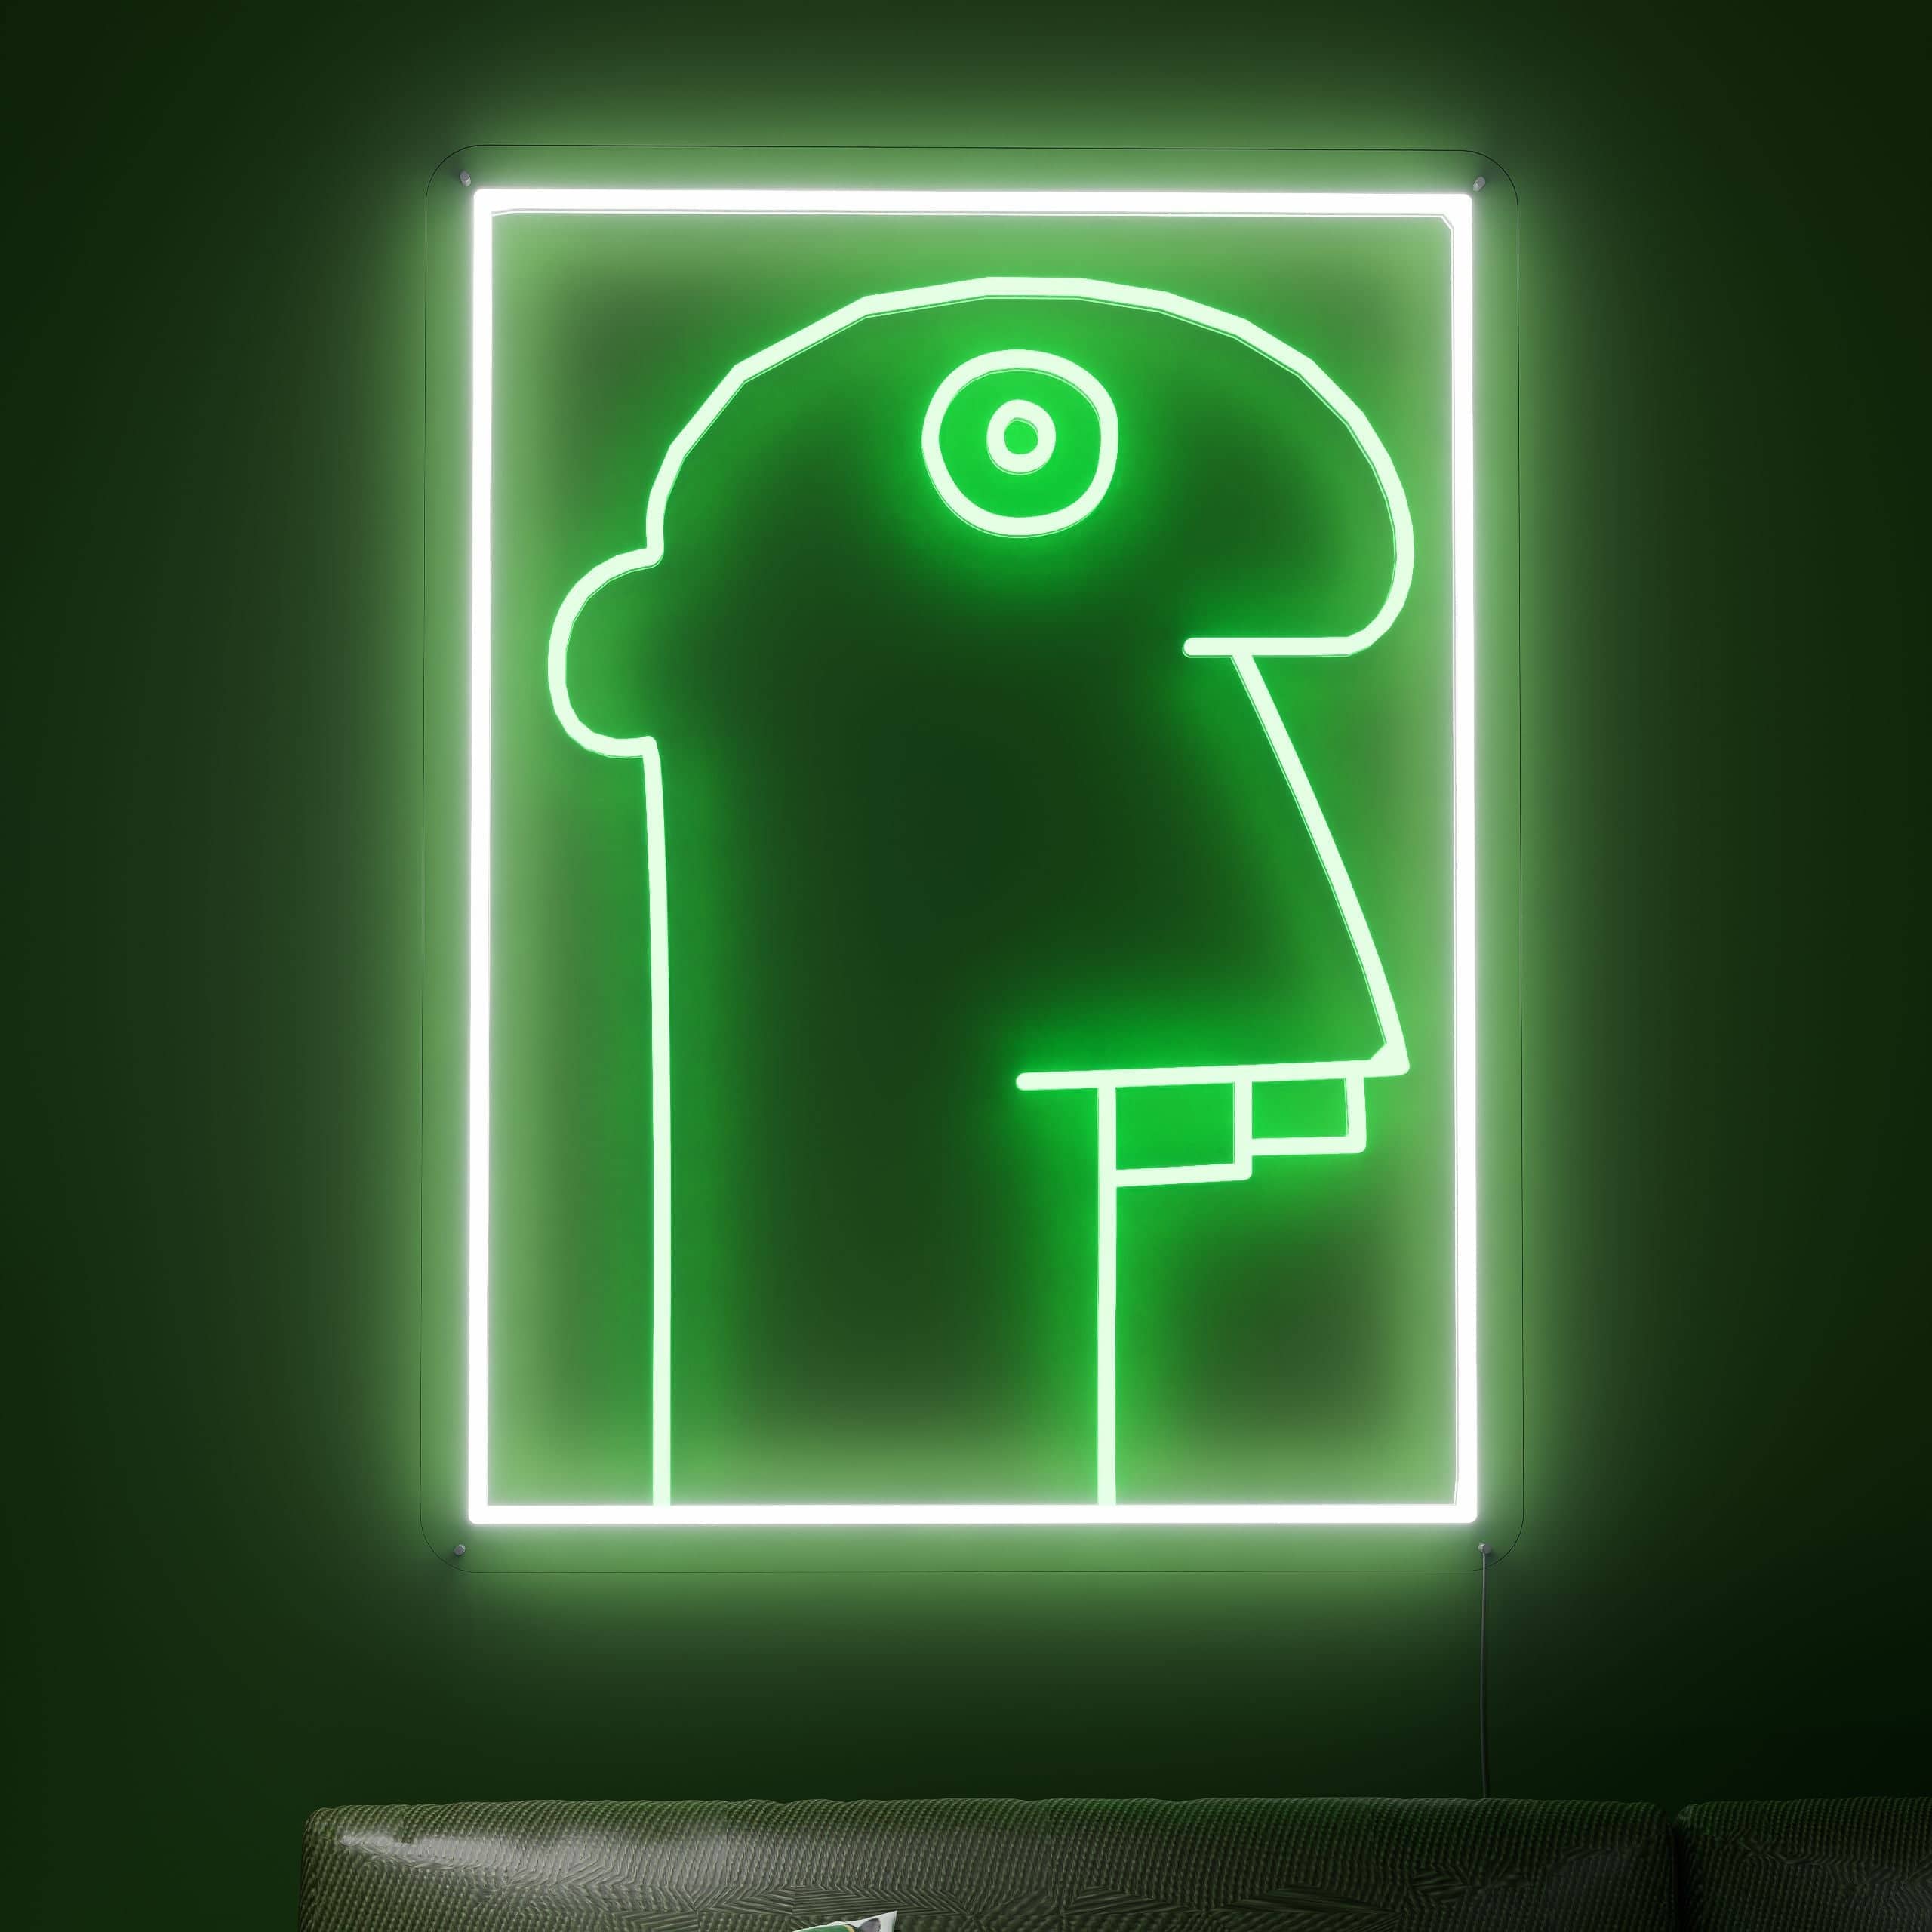 Artistic open neon sign adds flair to living spaces